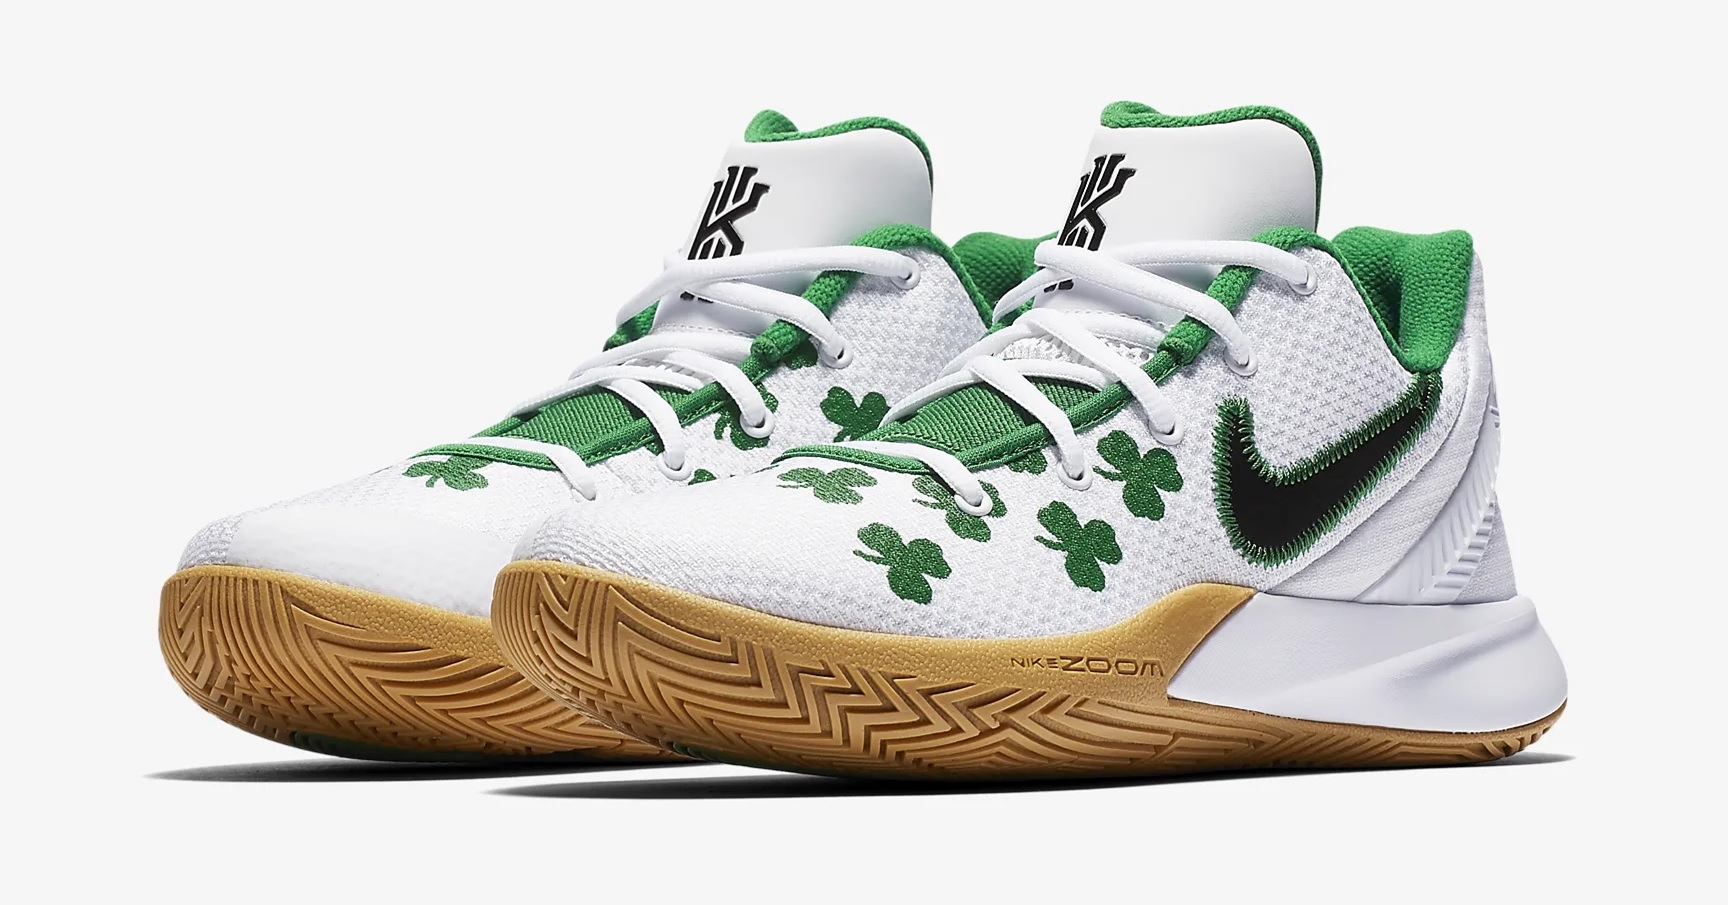 kyrie irving flytrap 2 ep